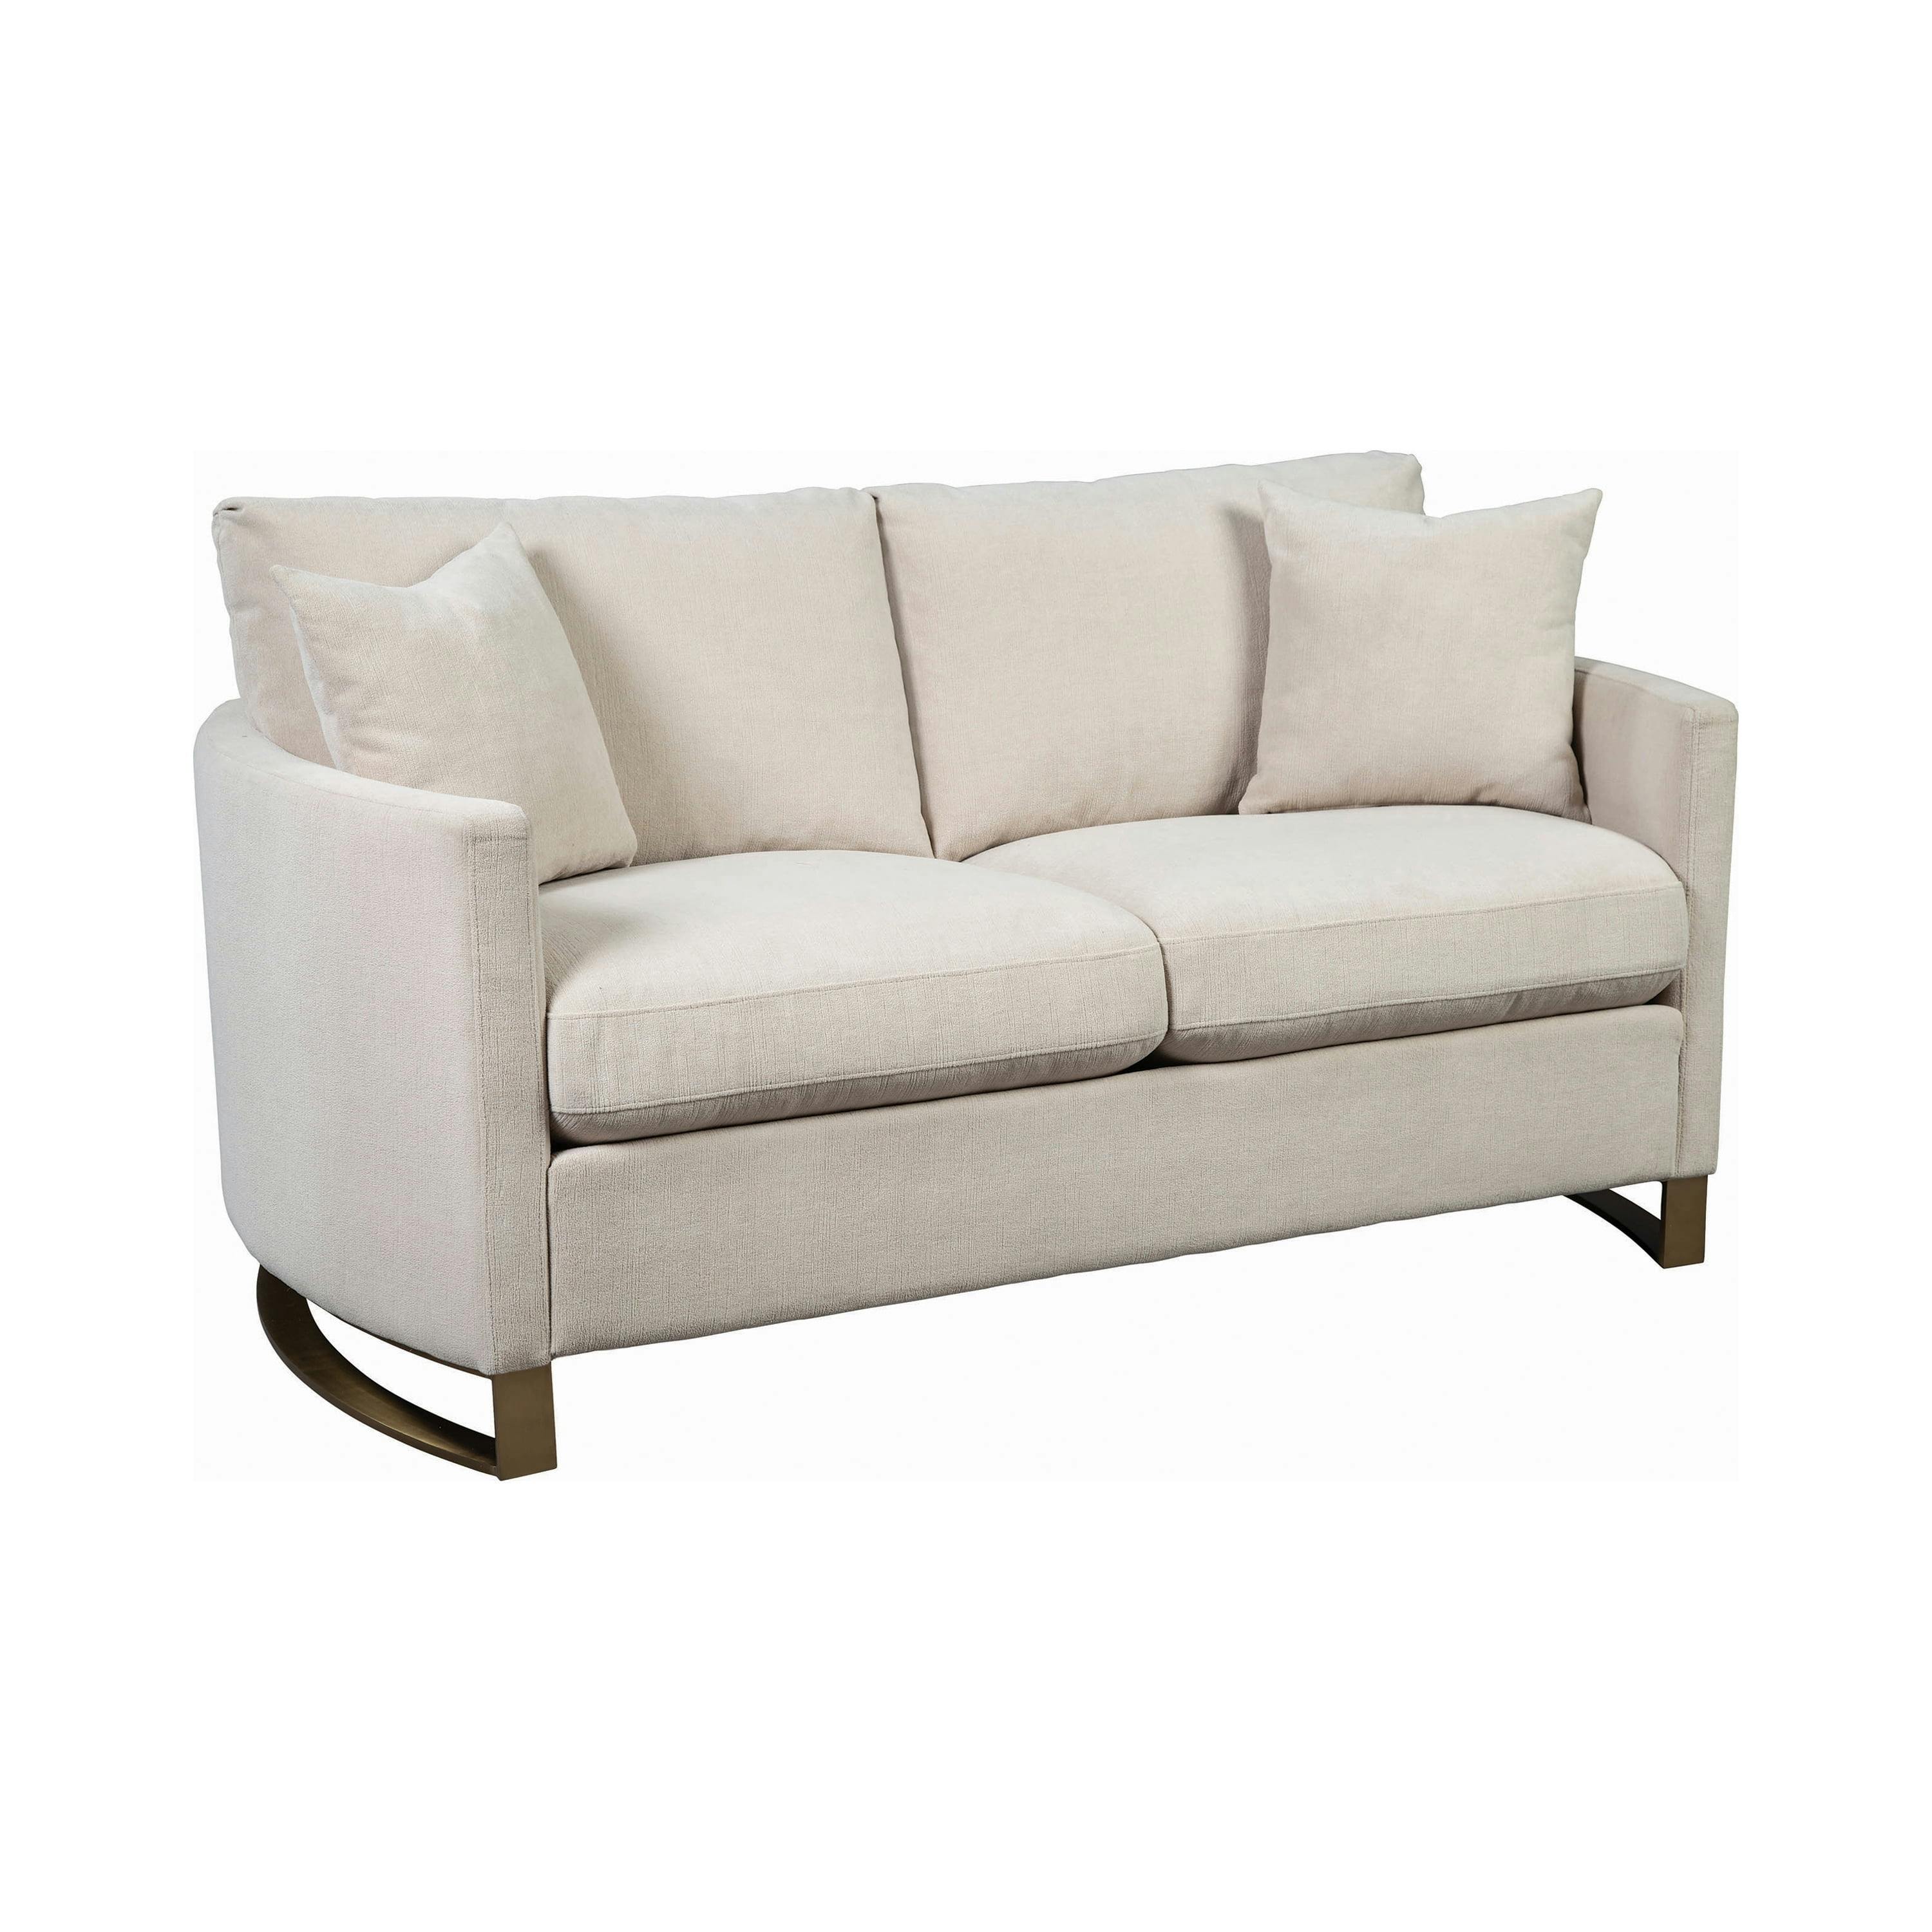 Elegant Beige Chenille and Pine Wood Loveseat with Removable Cushions